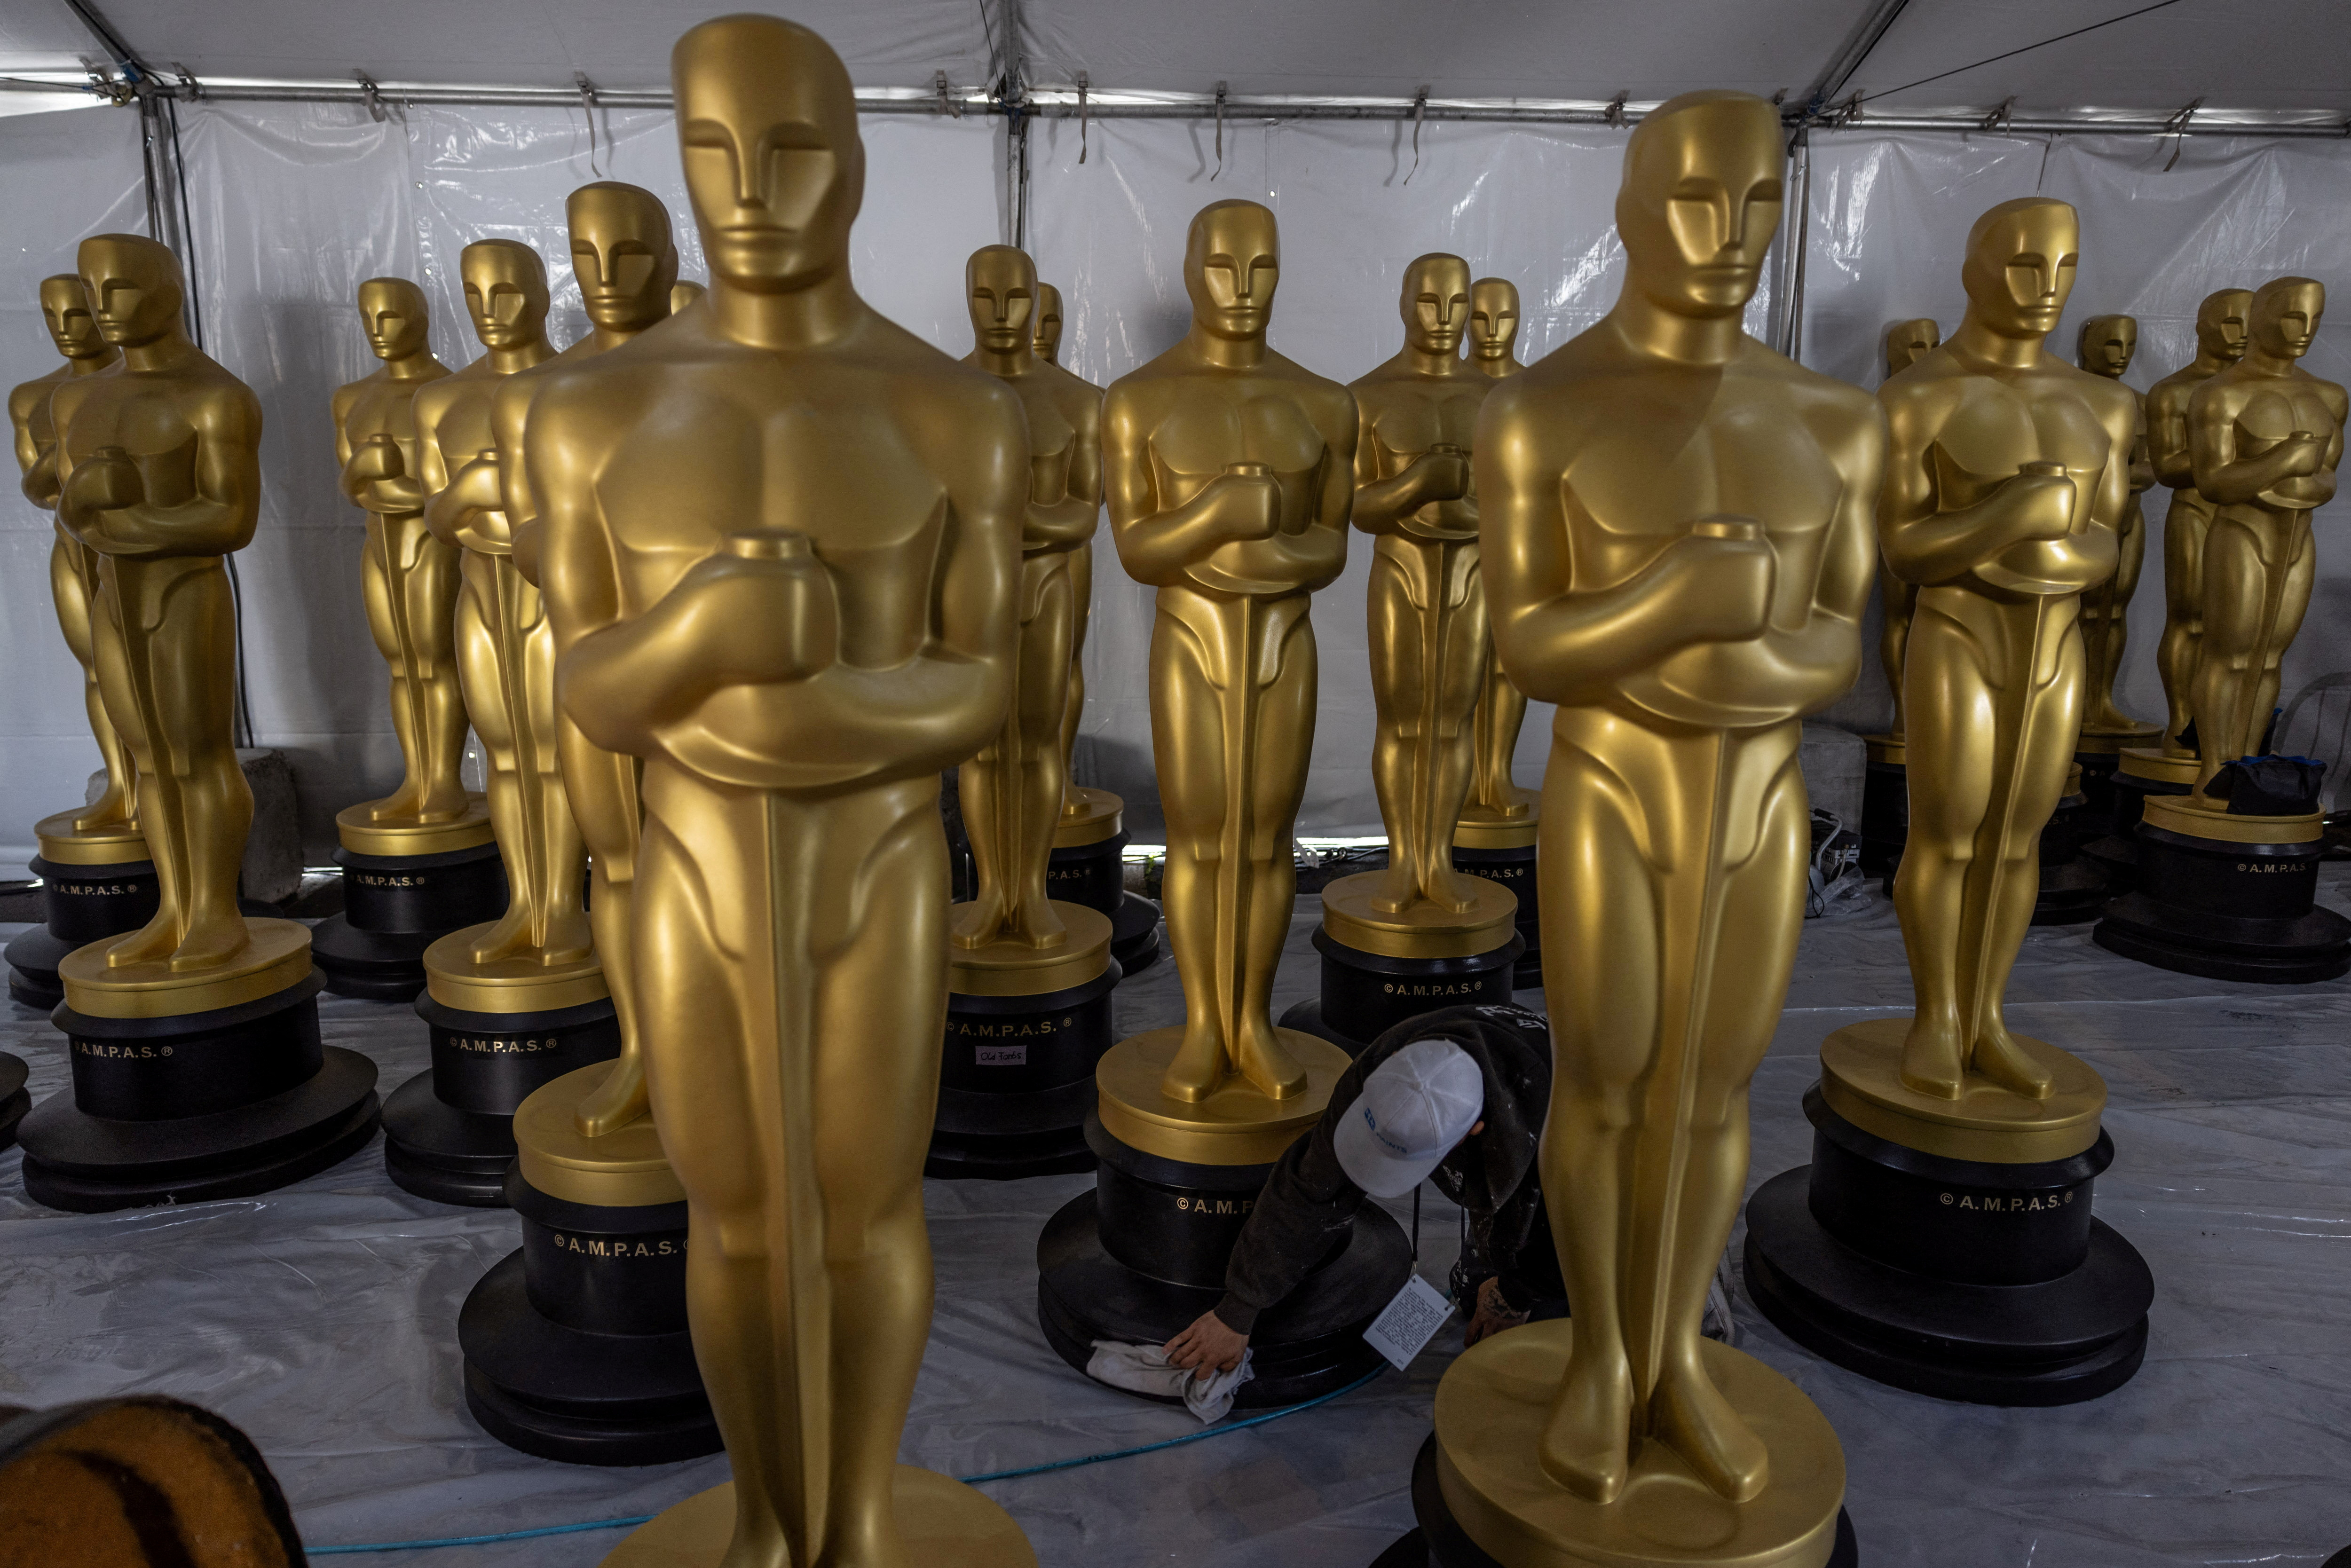 Preparations for the 96th Academy Awards Awards